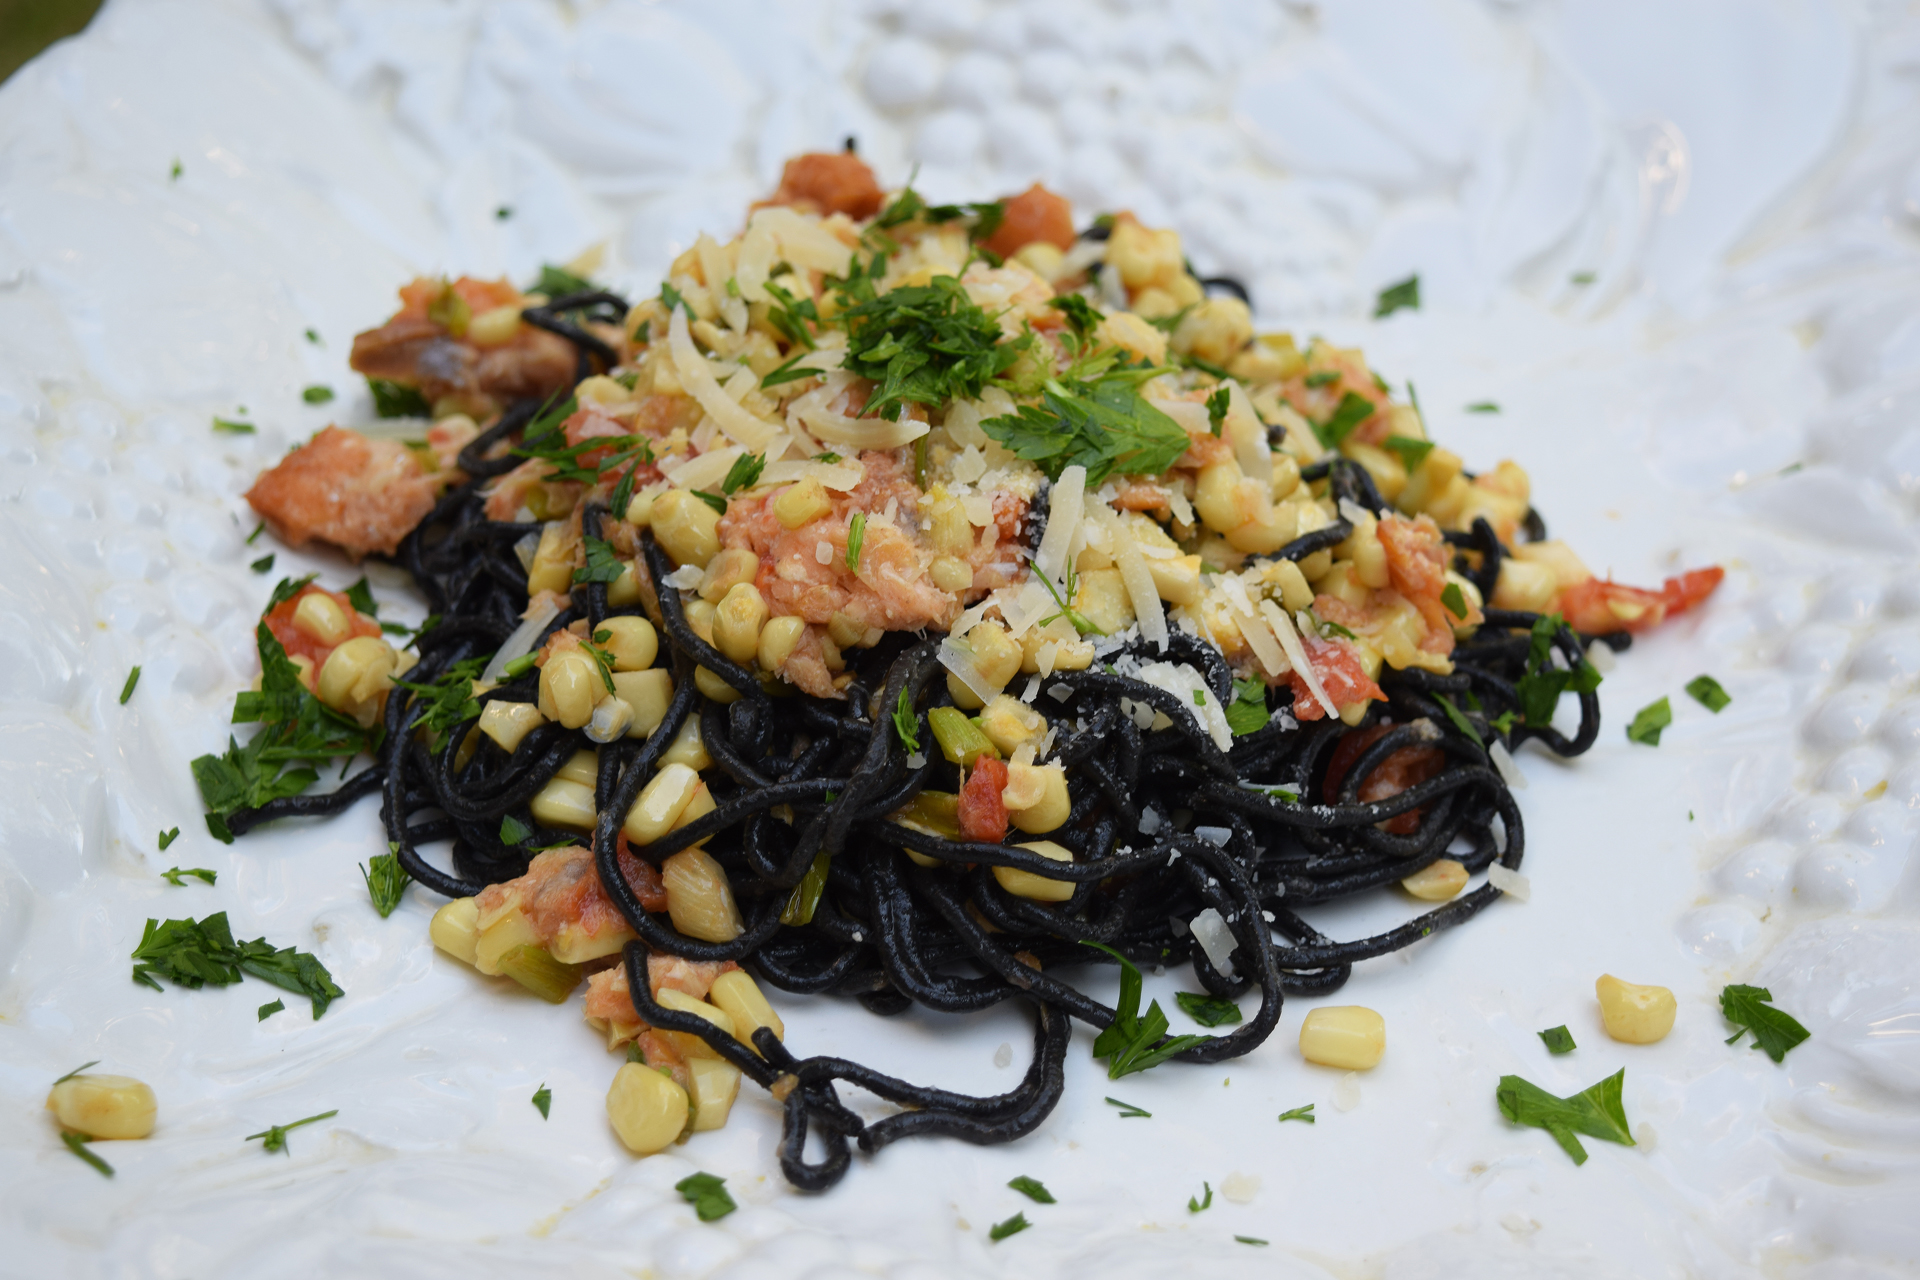 With its faint seashore flavors, the squid ink linguine from Pasta Pasta is great paired with seafood, such as this mélange of corn, tomato, smoked salmon and herbs.